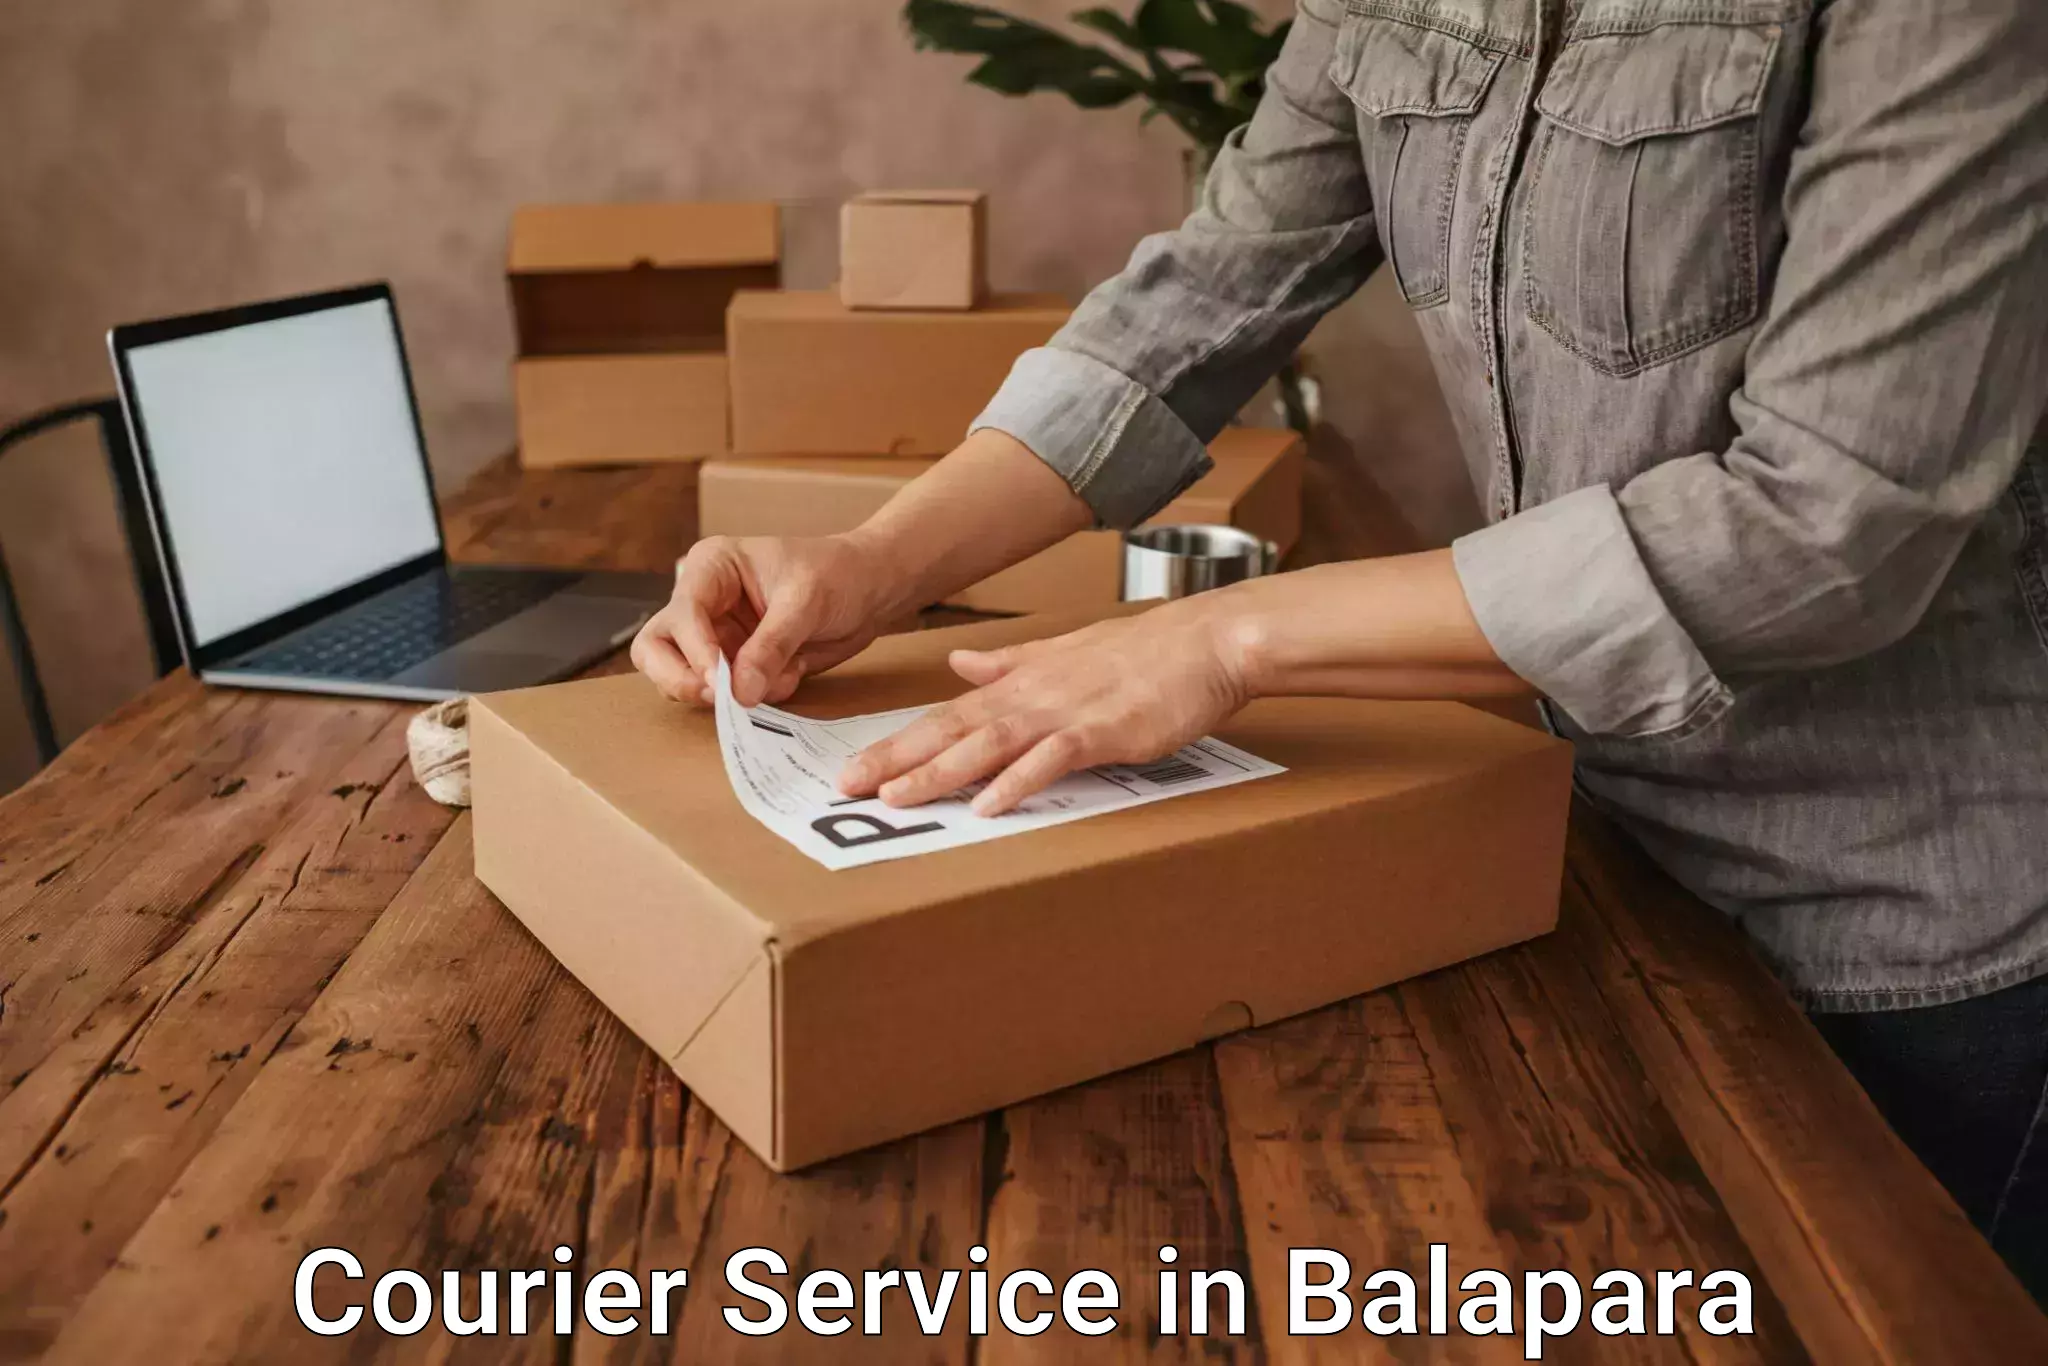 Modern delivery methods in Balapara